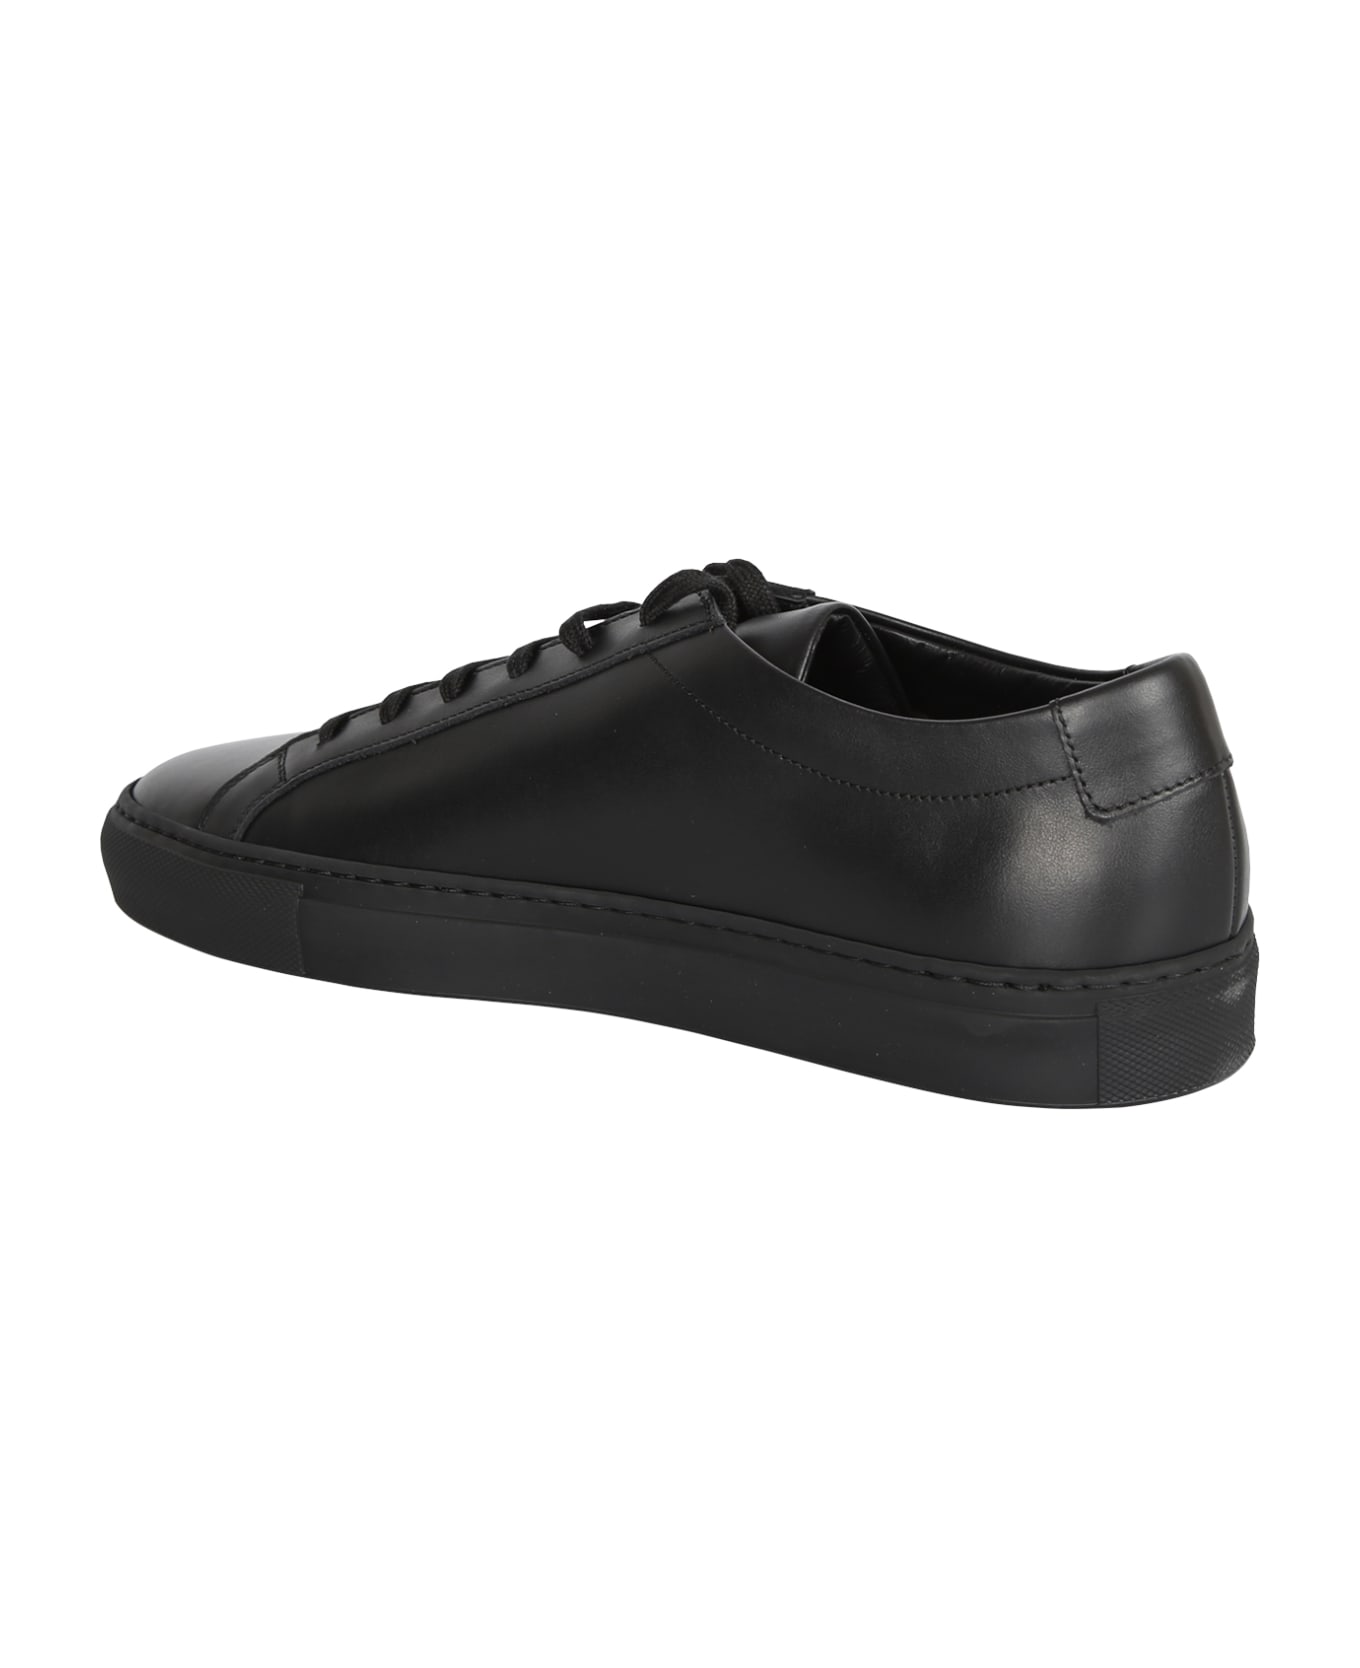 Common Projects Black Sneakers - Black スニーカー